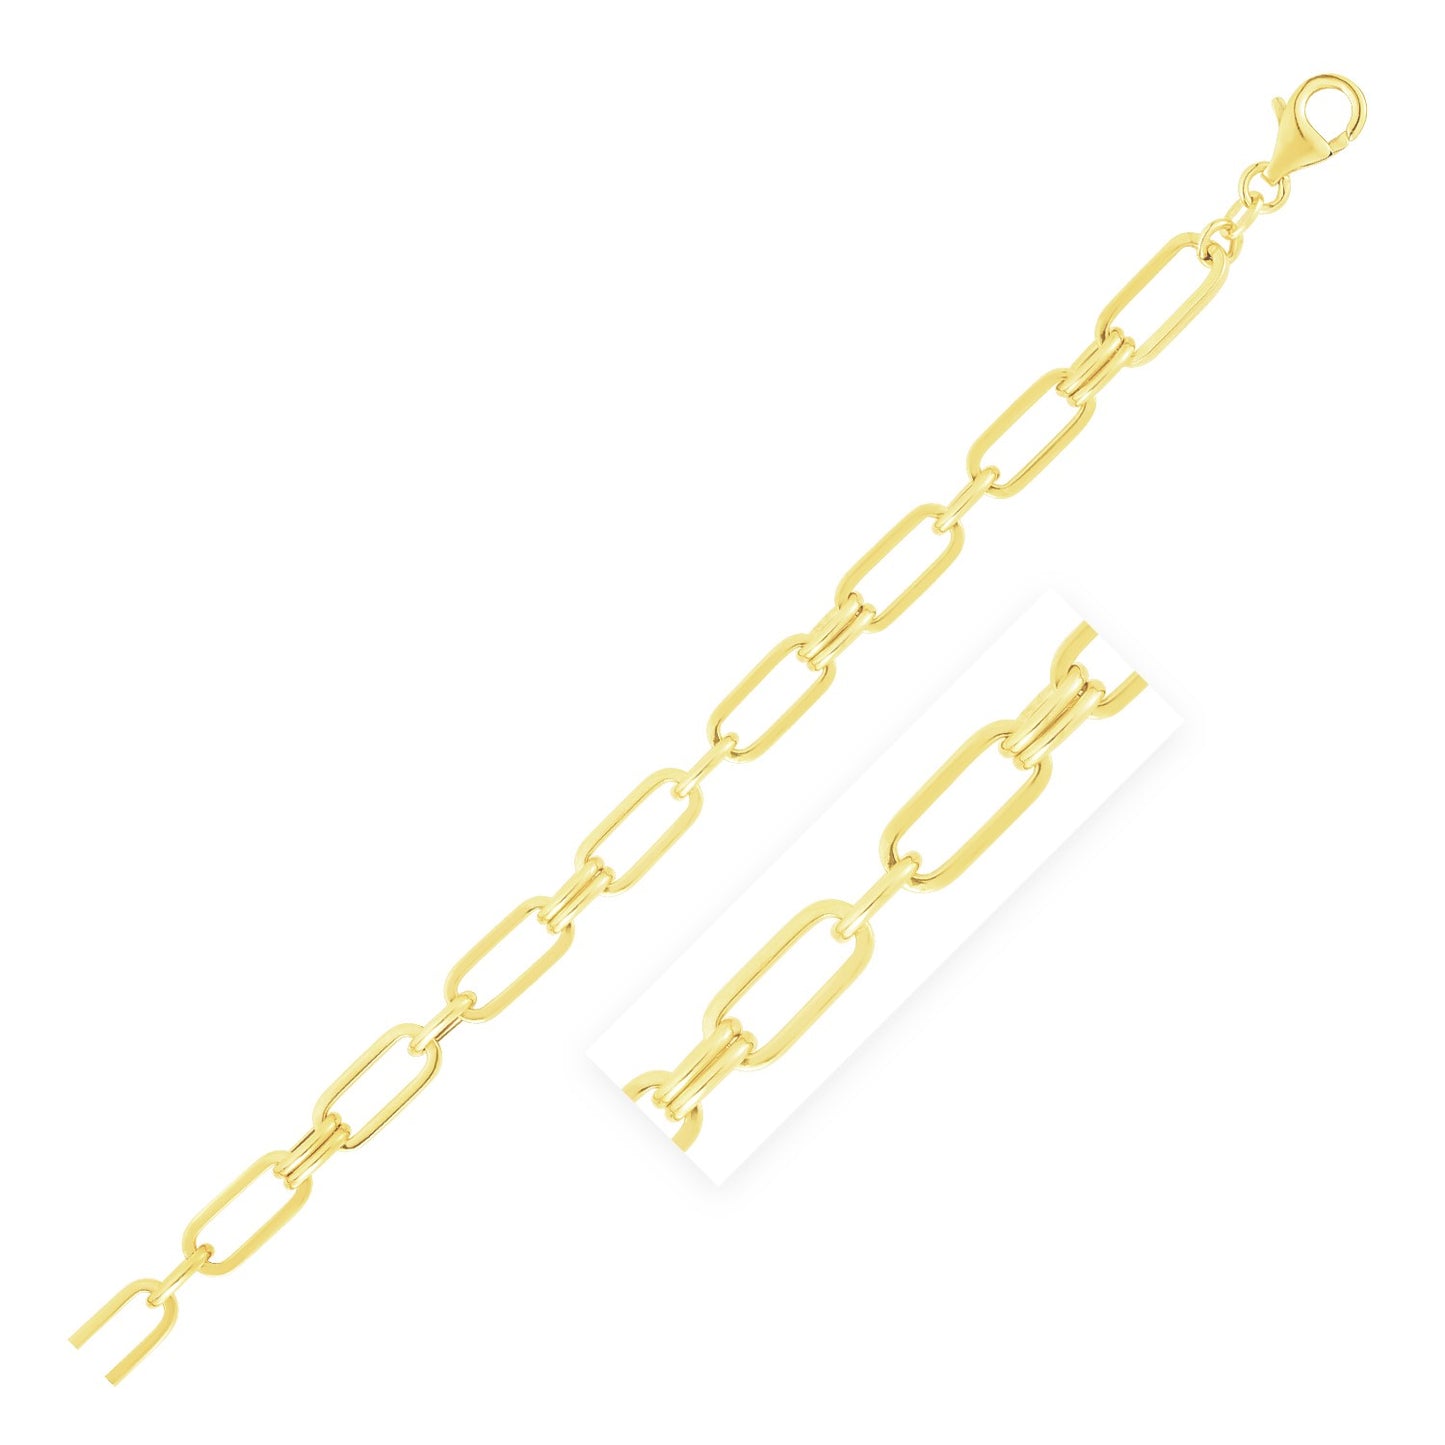 14k Yellow Gold High Polish Paperclip Rondel Link Chain Bracelet